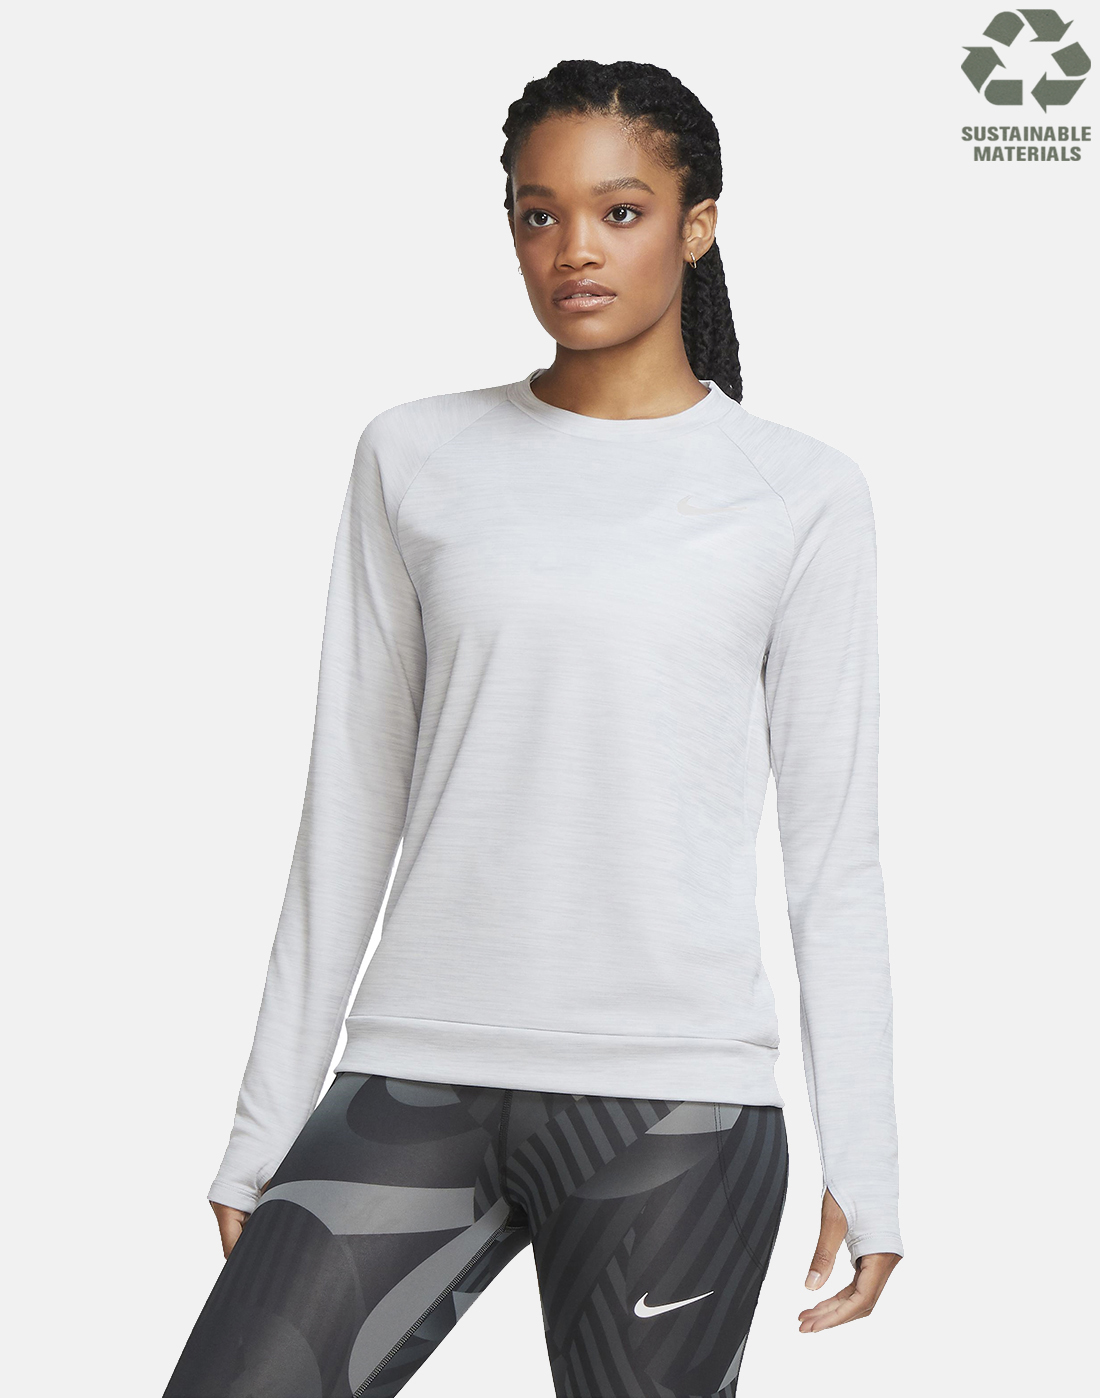 Nike Womens Pacer Crewneck Long Sleeves Top - Grey | Life Style Sports UK